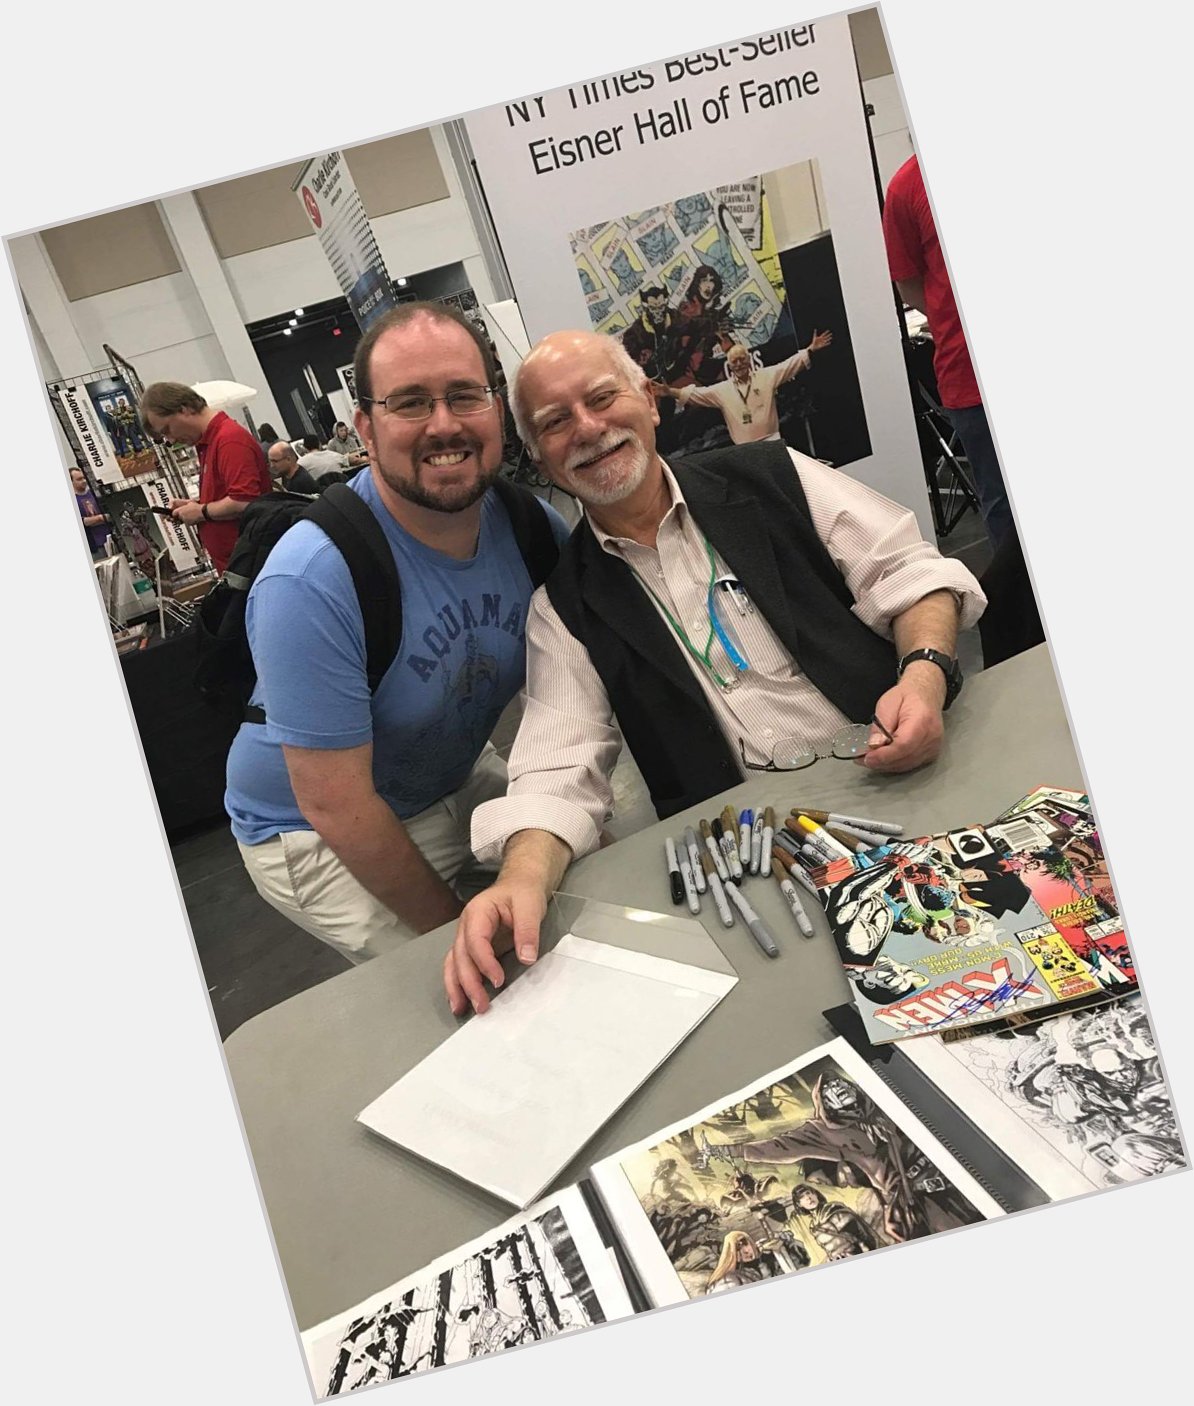 Happy birthday Chris Claremont! Thank you for so much! It was a real pleasure to meet you. 